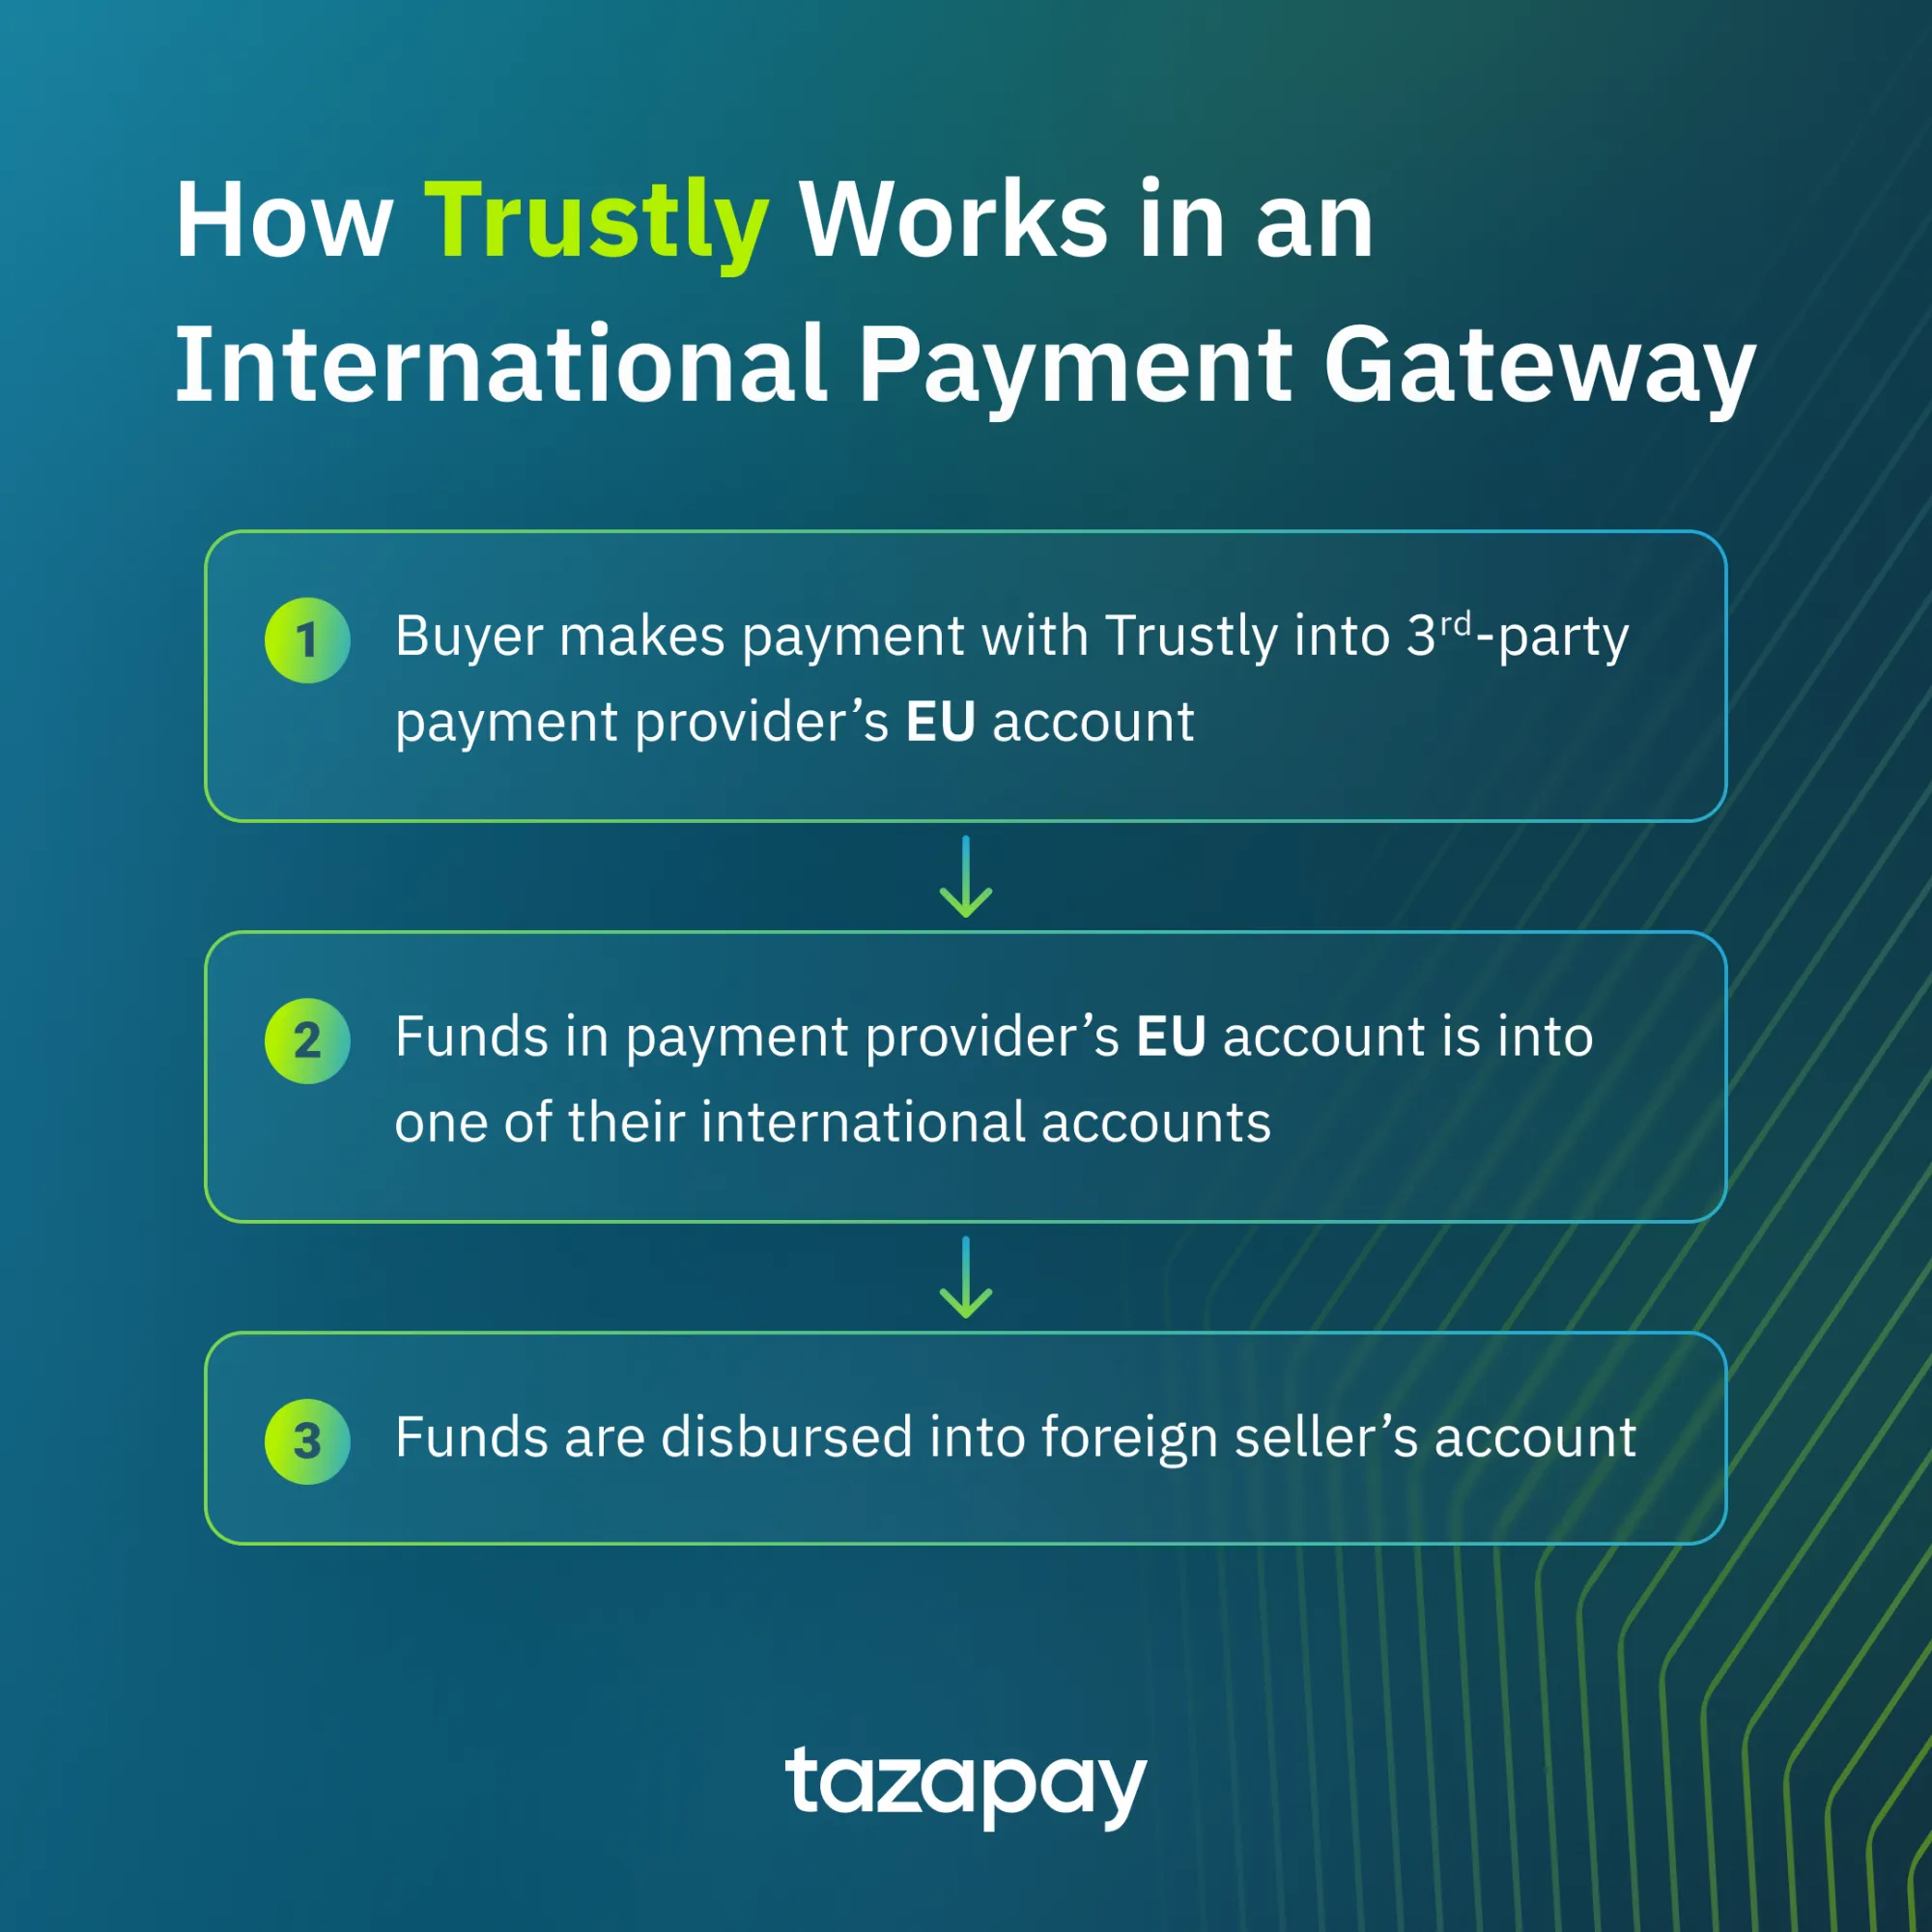 How Trustly Works in an International Payment Gateway